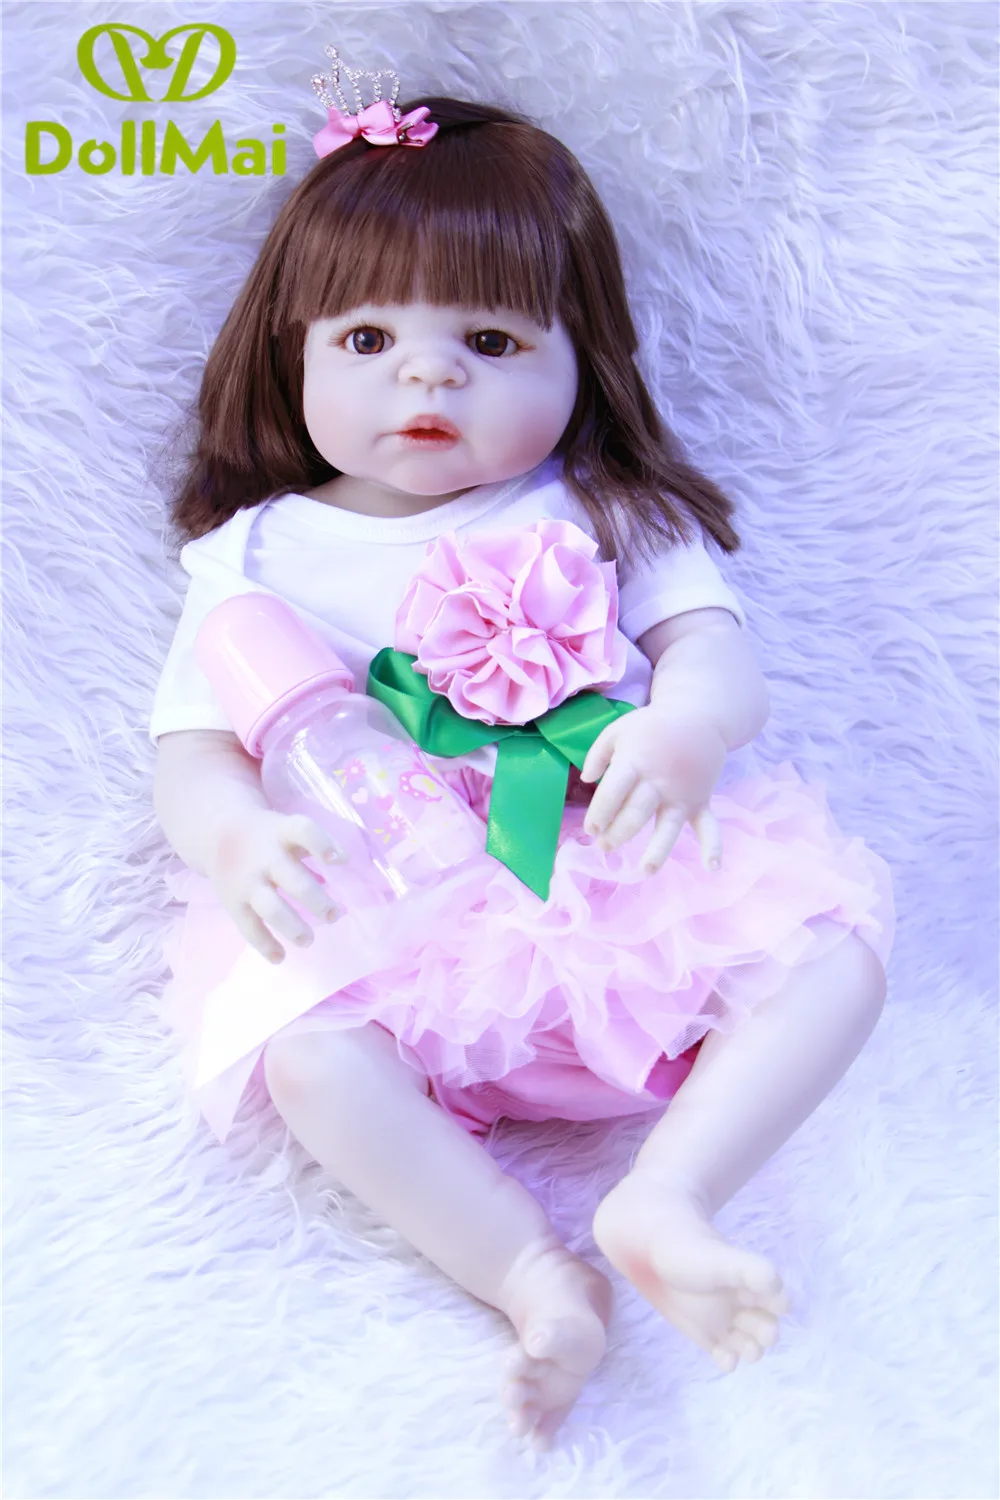 

Full silicone reborn baby girl dolls 22"57cm rooted hair real babydoll toys gift bebe doll reborn com corpo de silicone menina